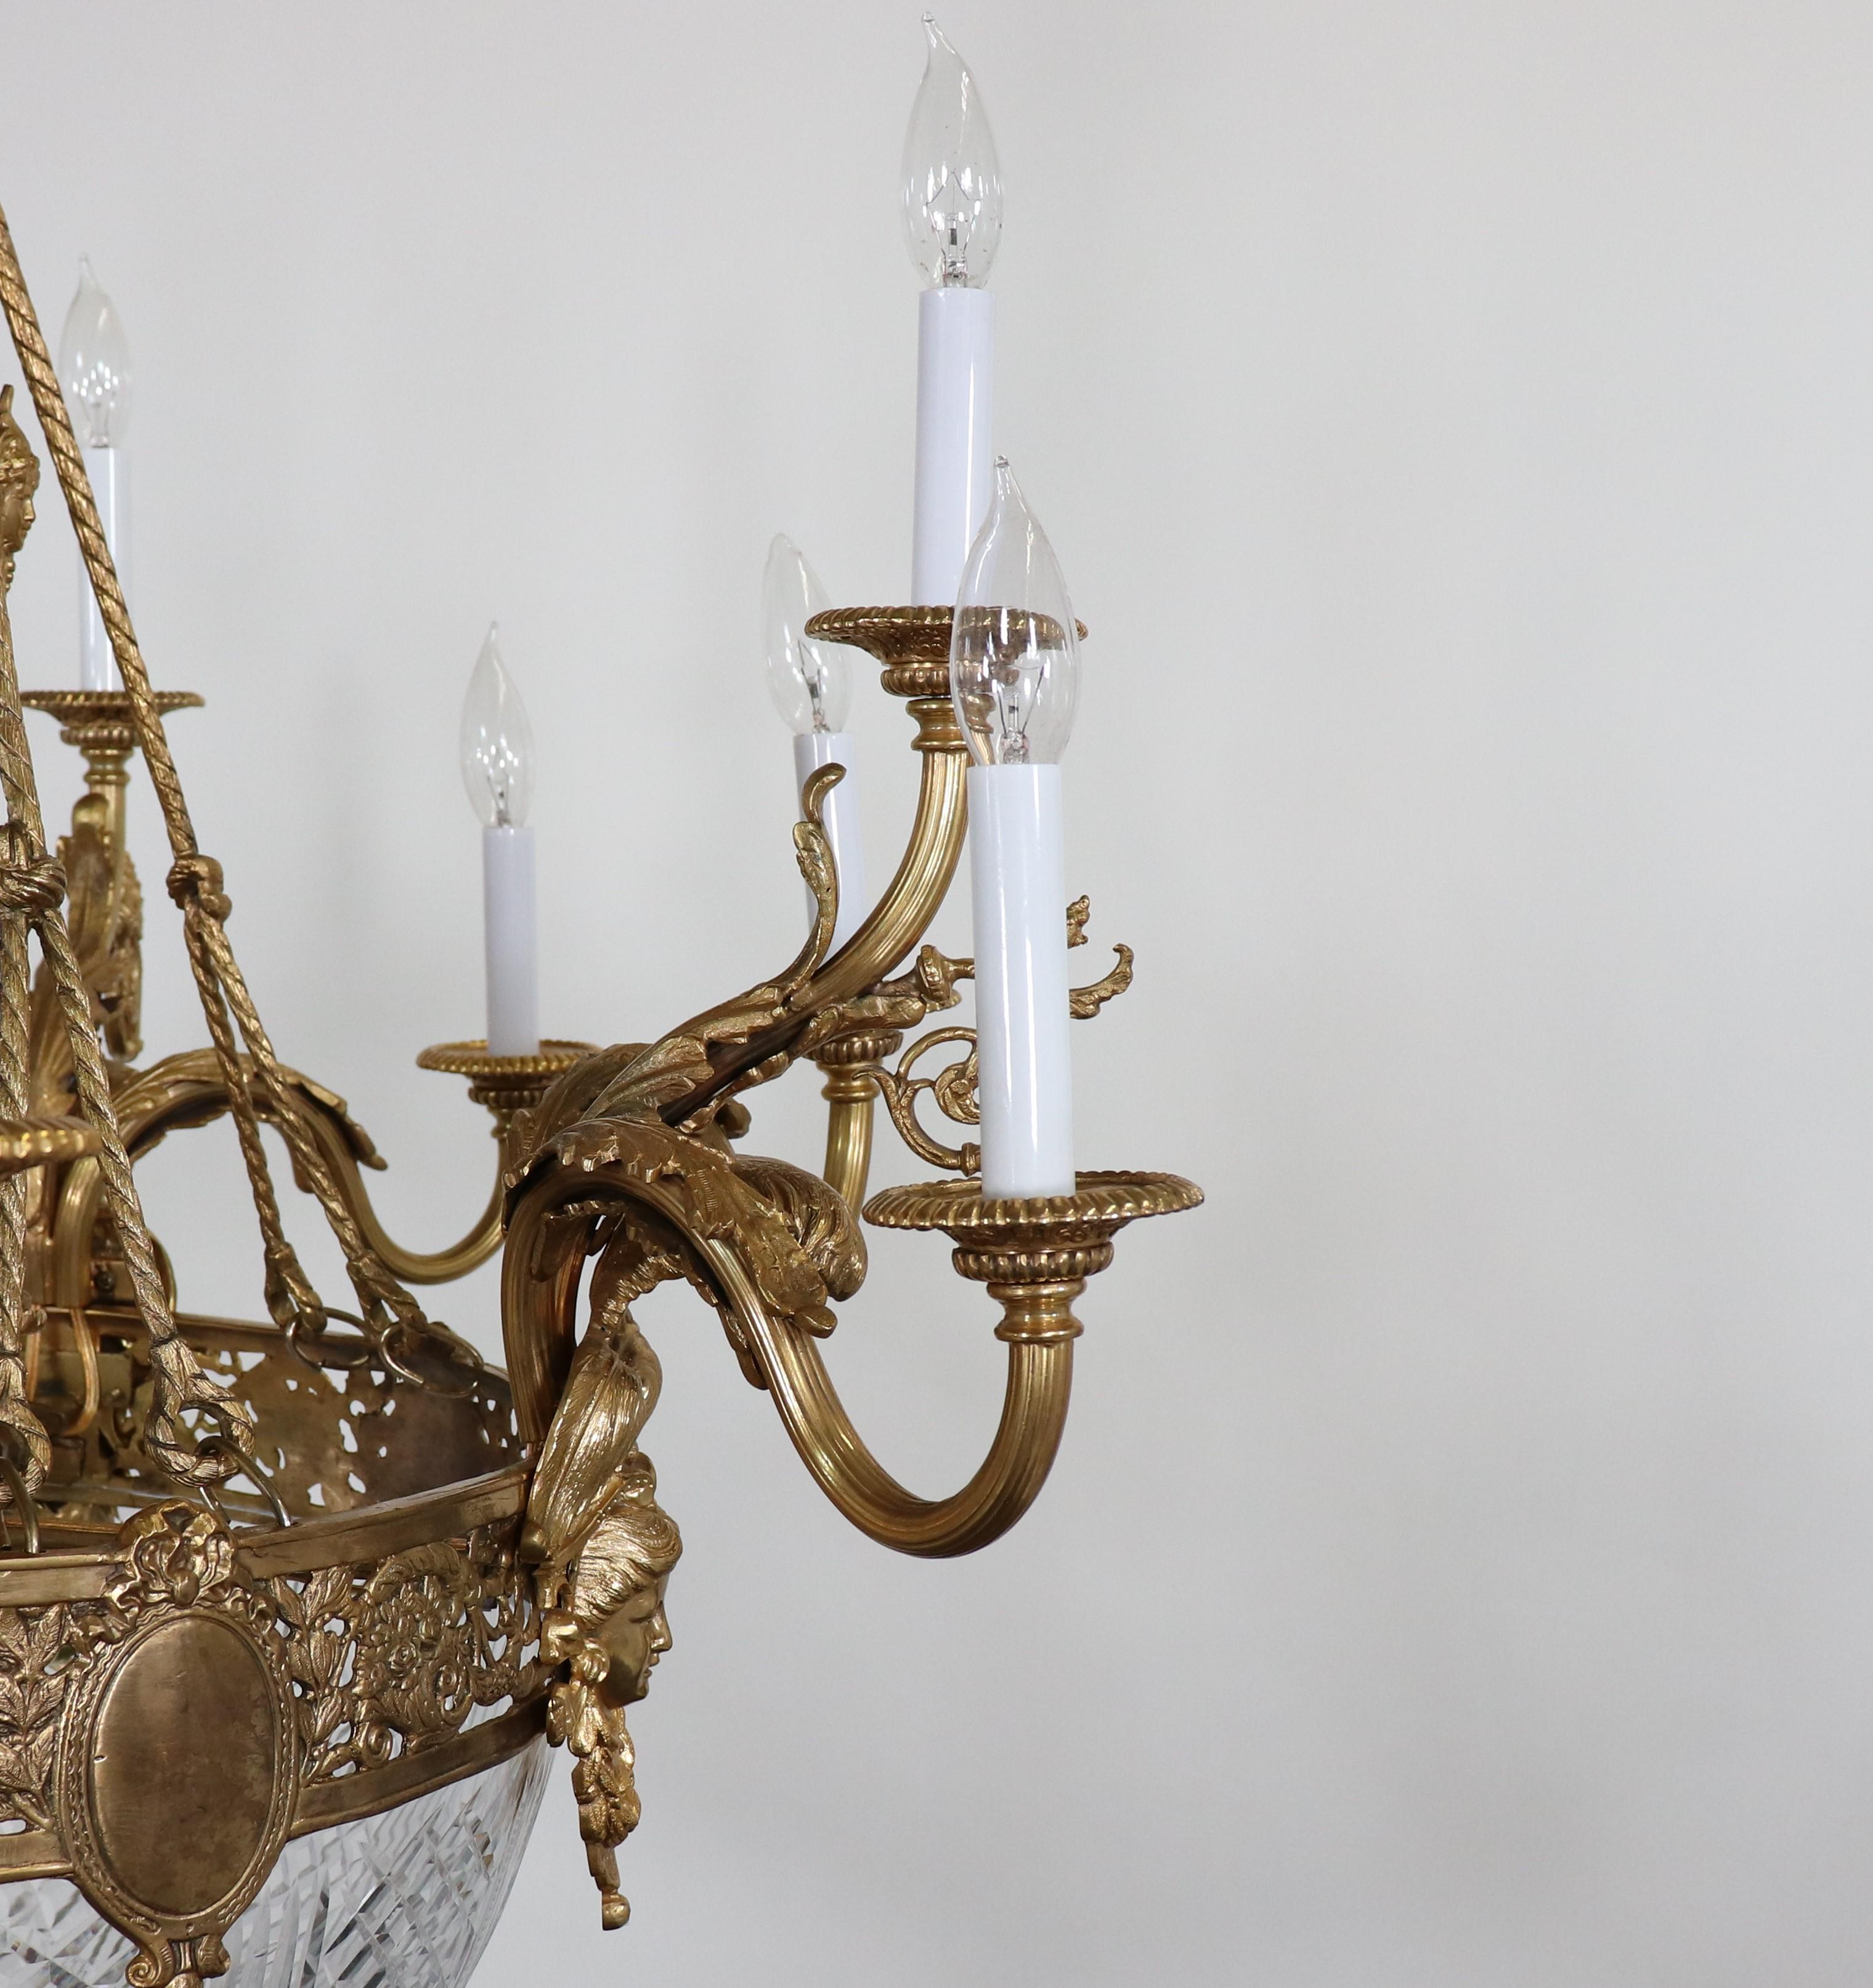 Circa 1910 French Beaux-Arts Gilt Bronze Chandelier For Sale 5